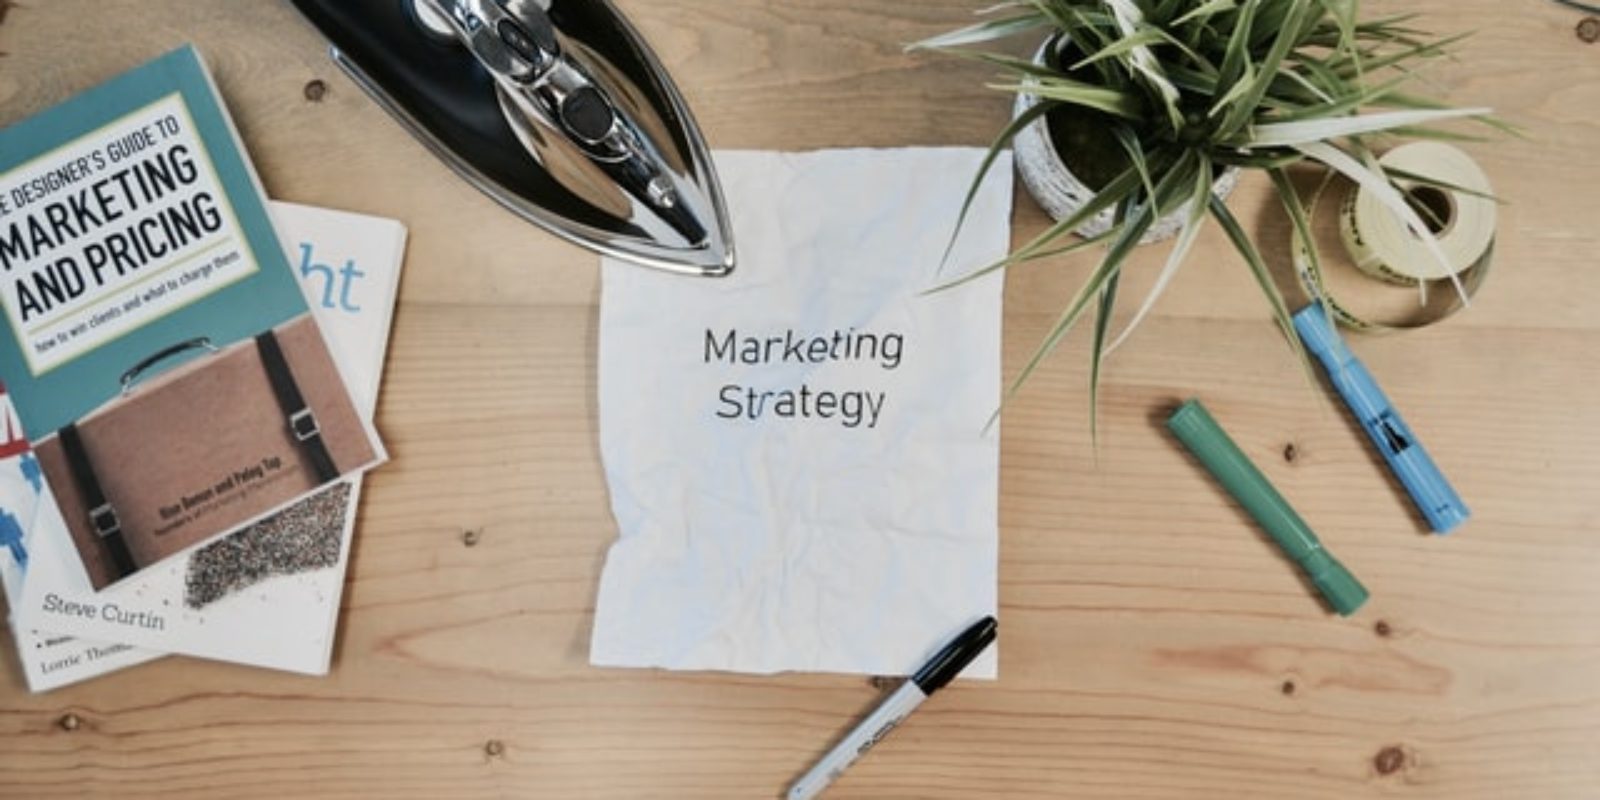 How to reshape your marketing strategy for the “stay-at-home” trend and beyond